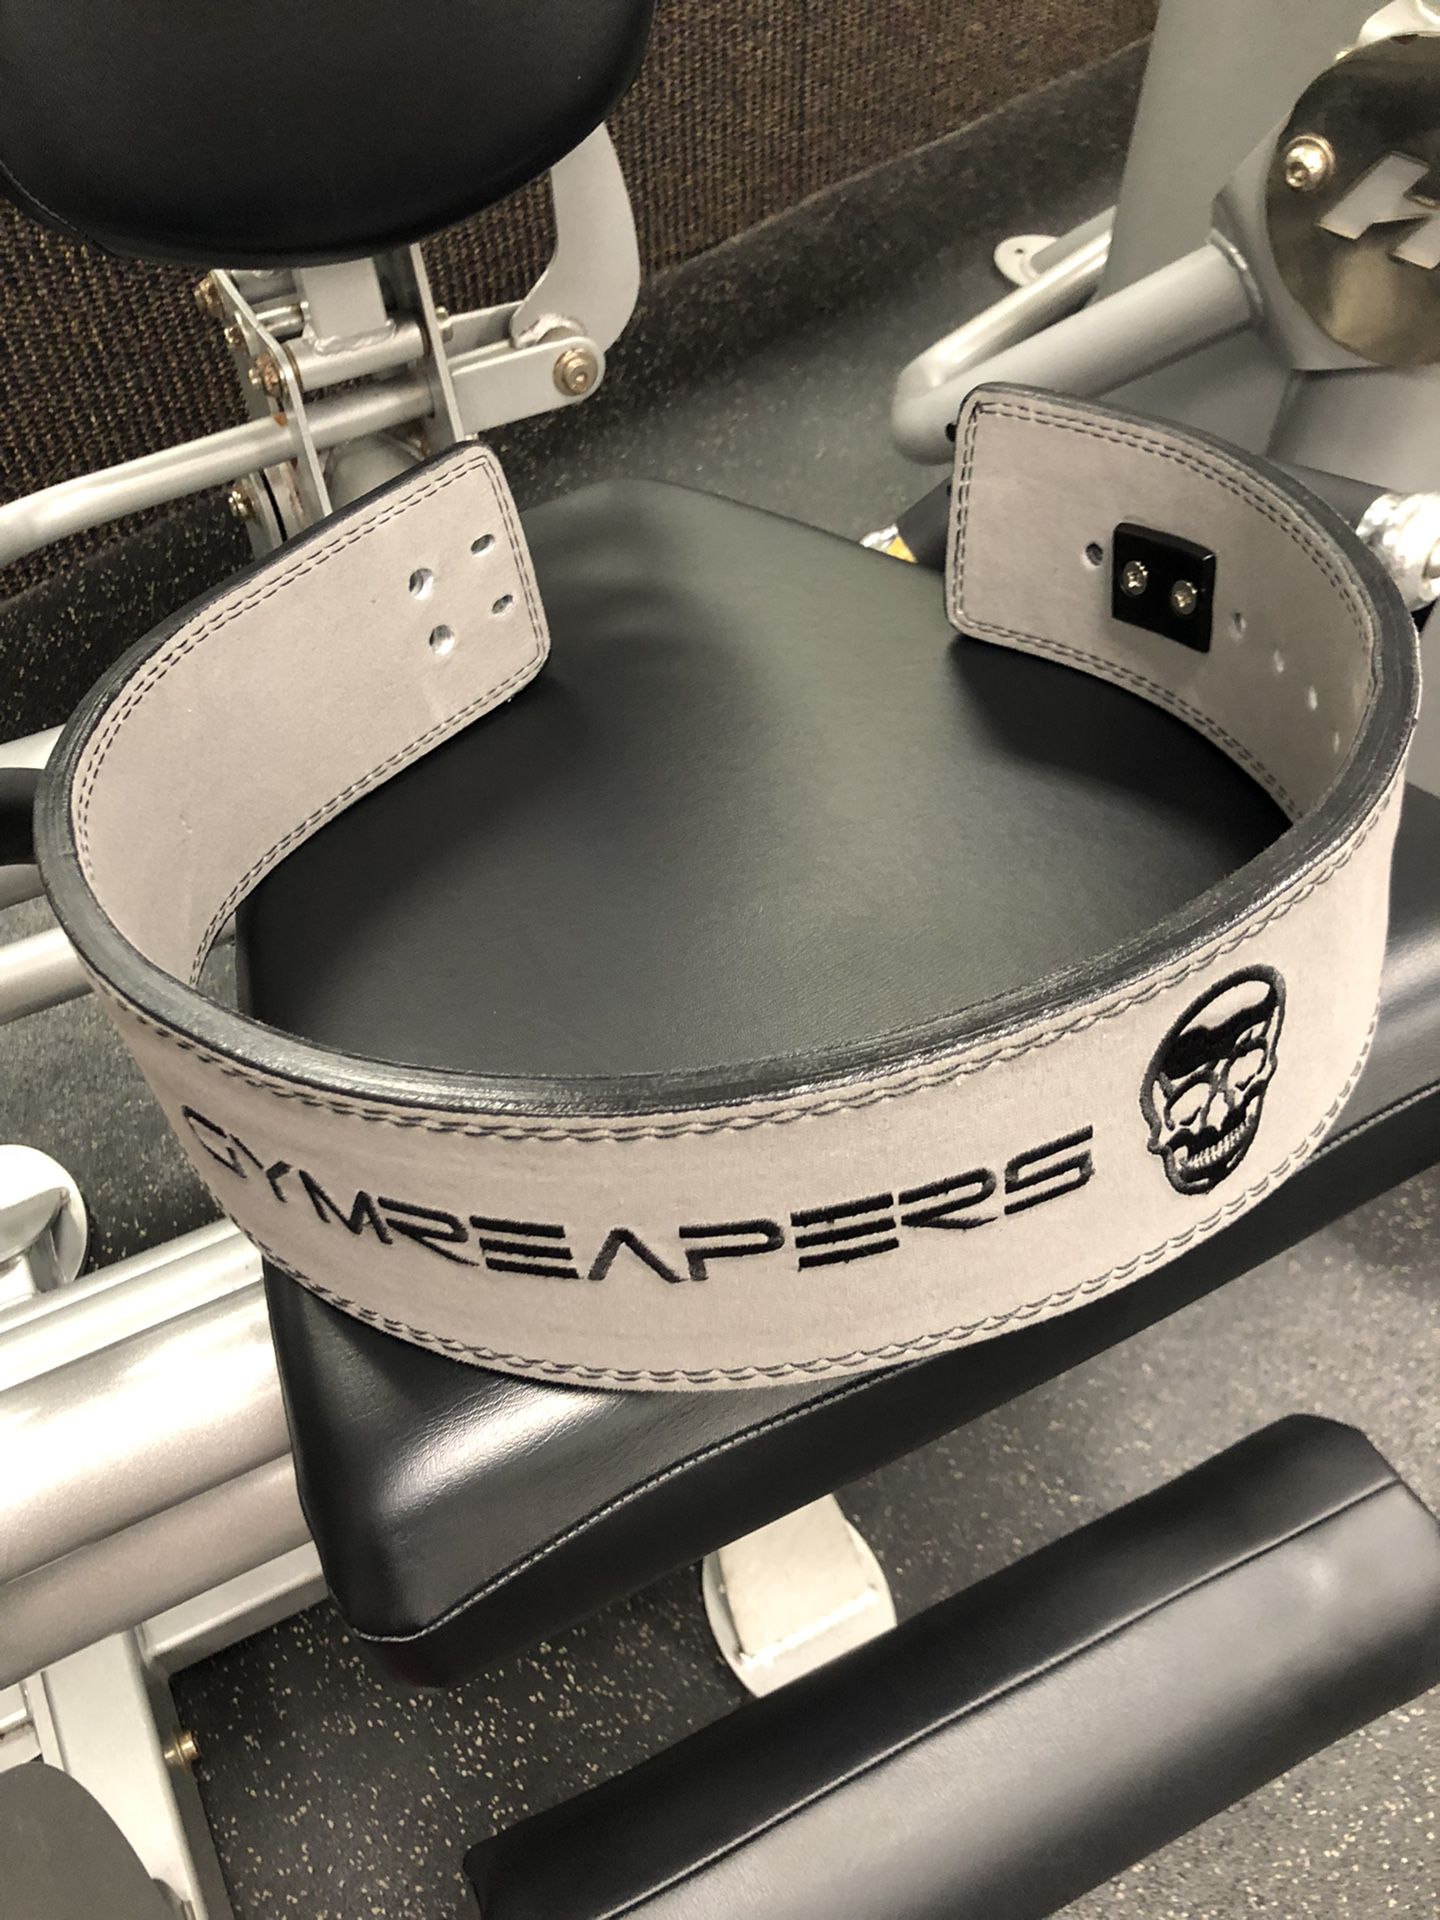 Gym Lifting Belt “GymReapers”